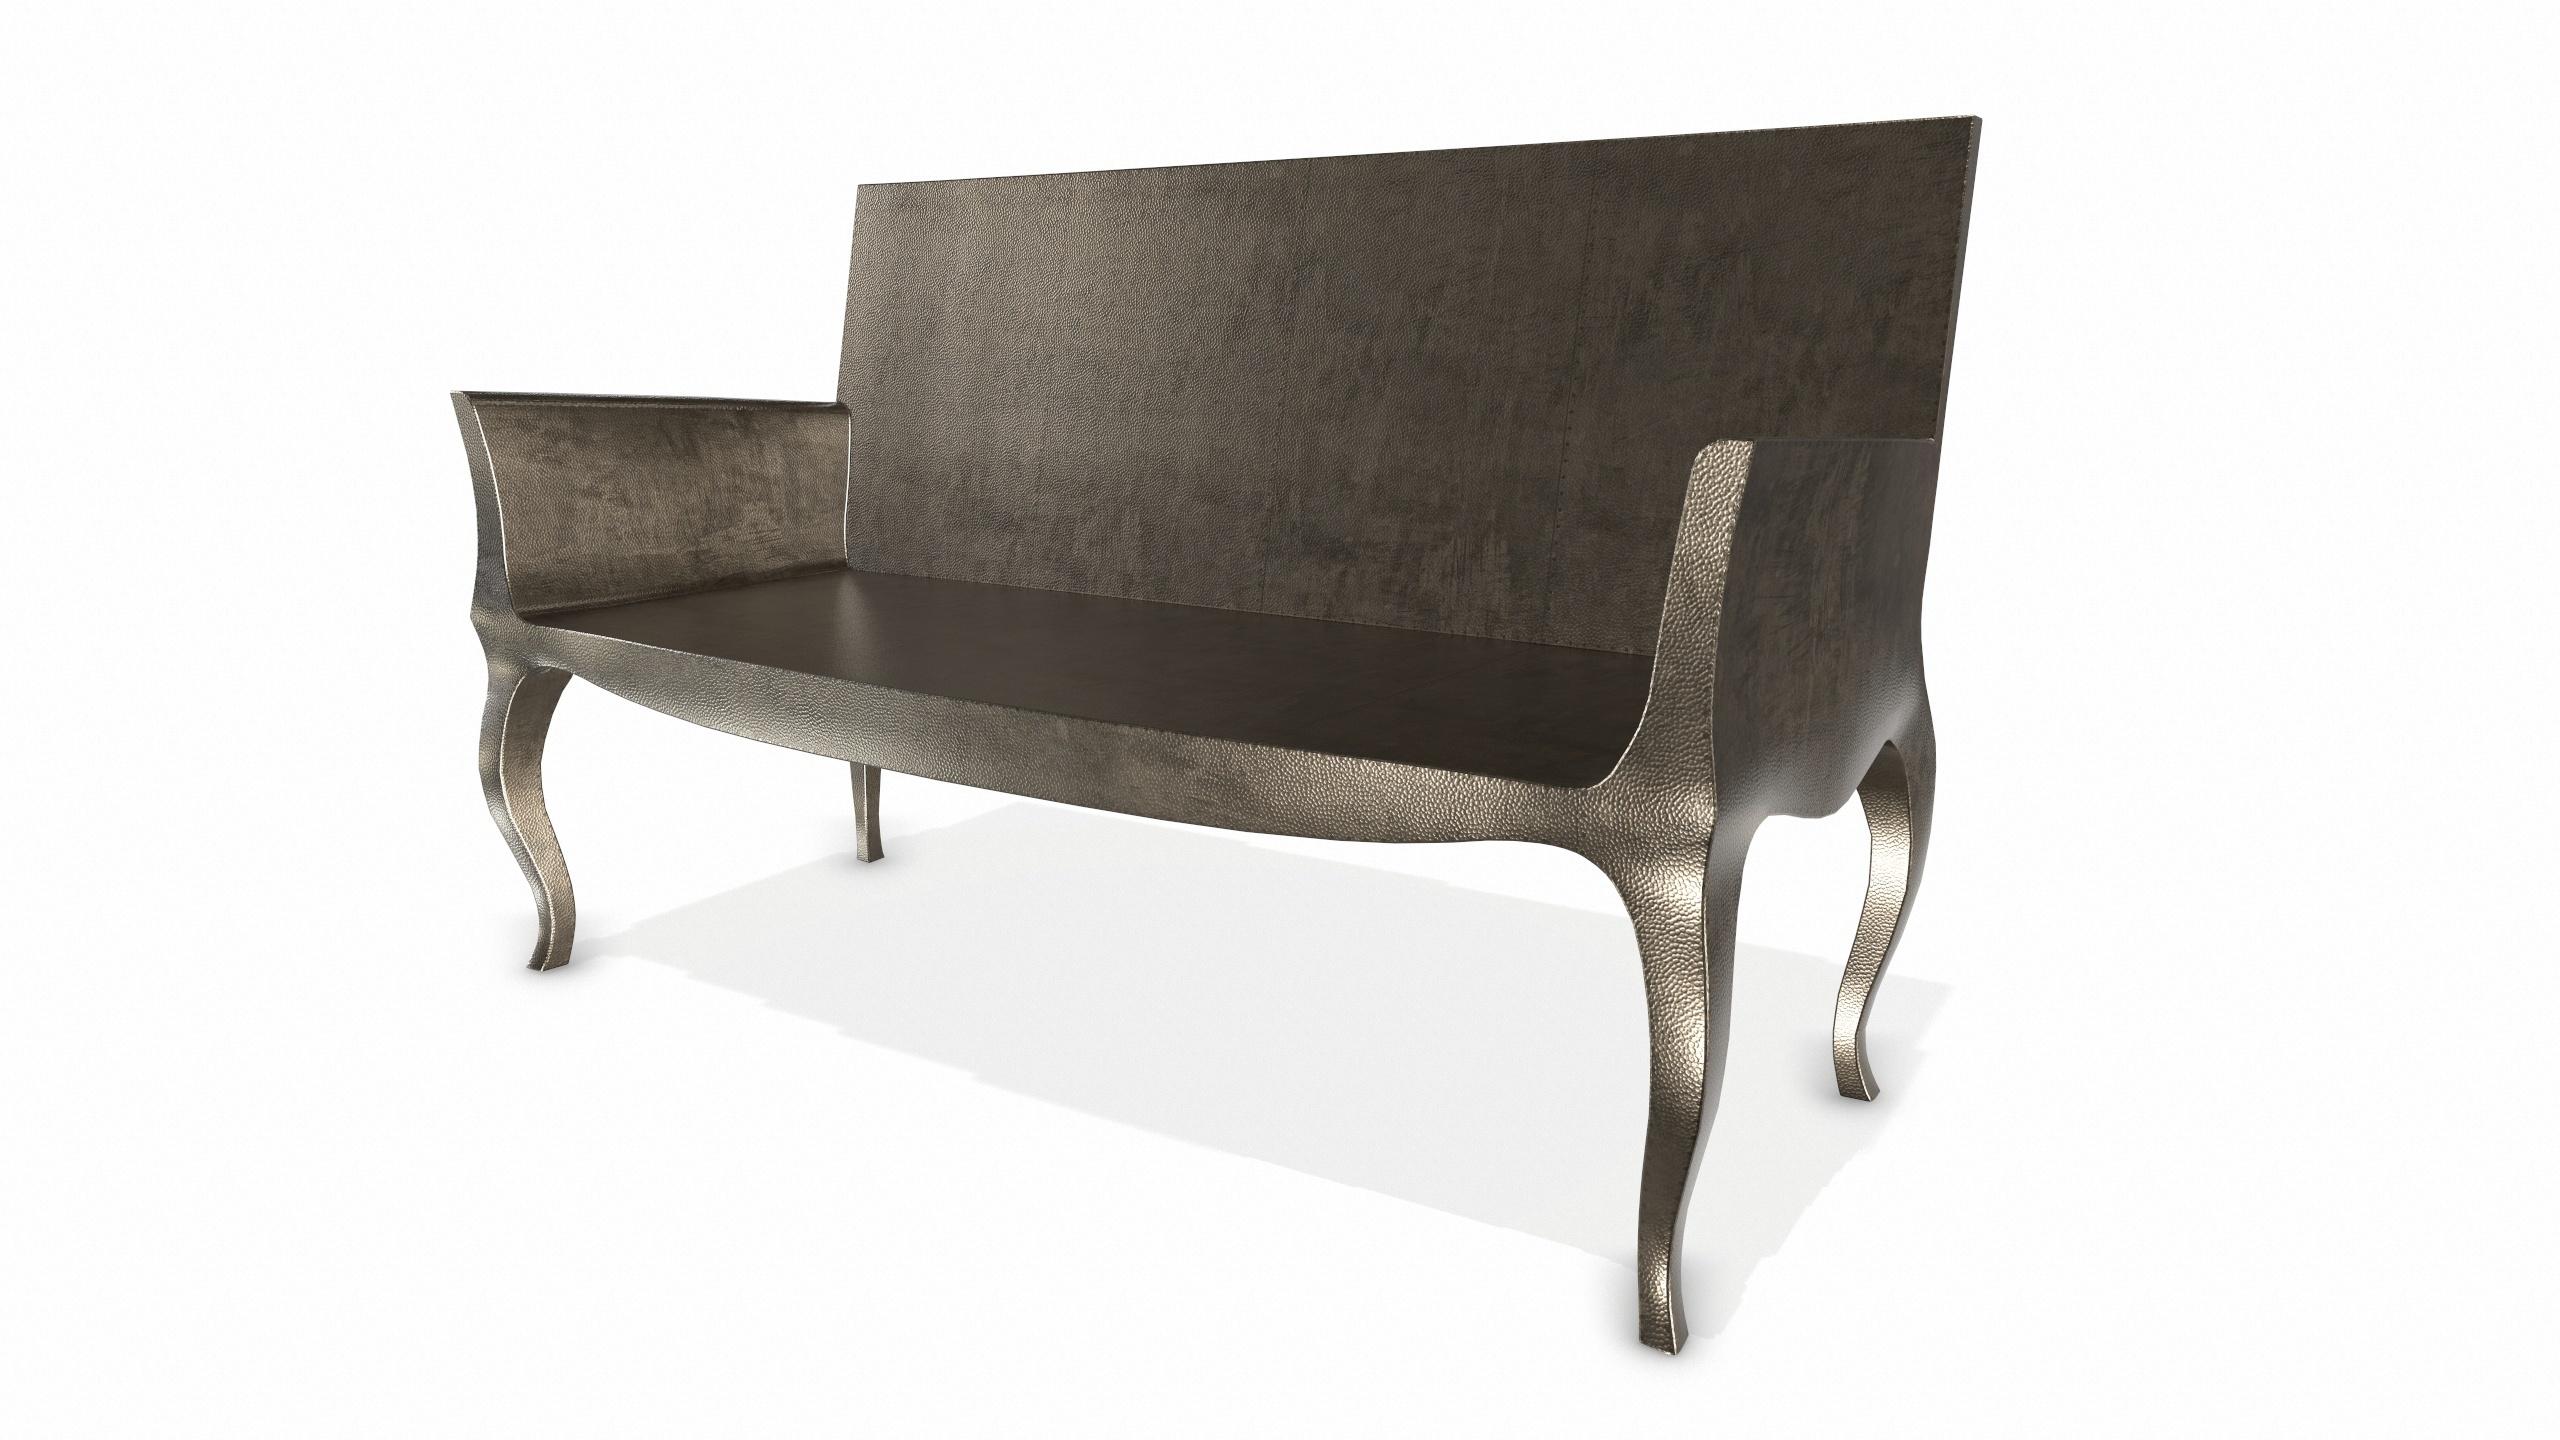 American Louise Settee Art Deco Benches in Mid. Hammered Antique Bronze by Paul Mathieu For Sale